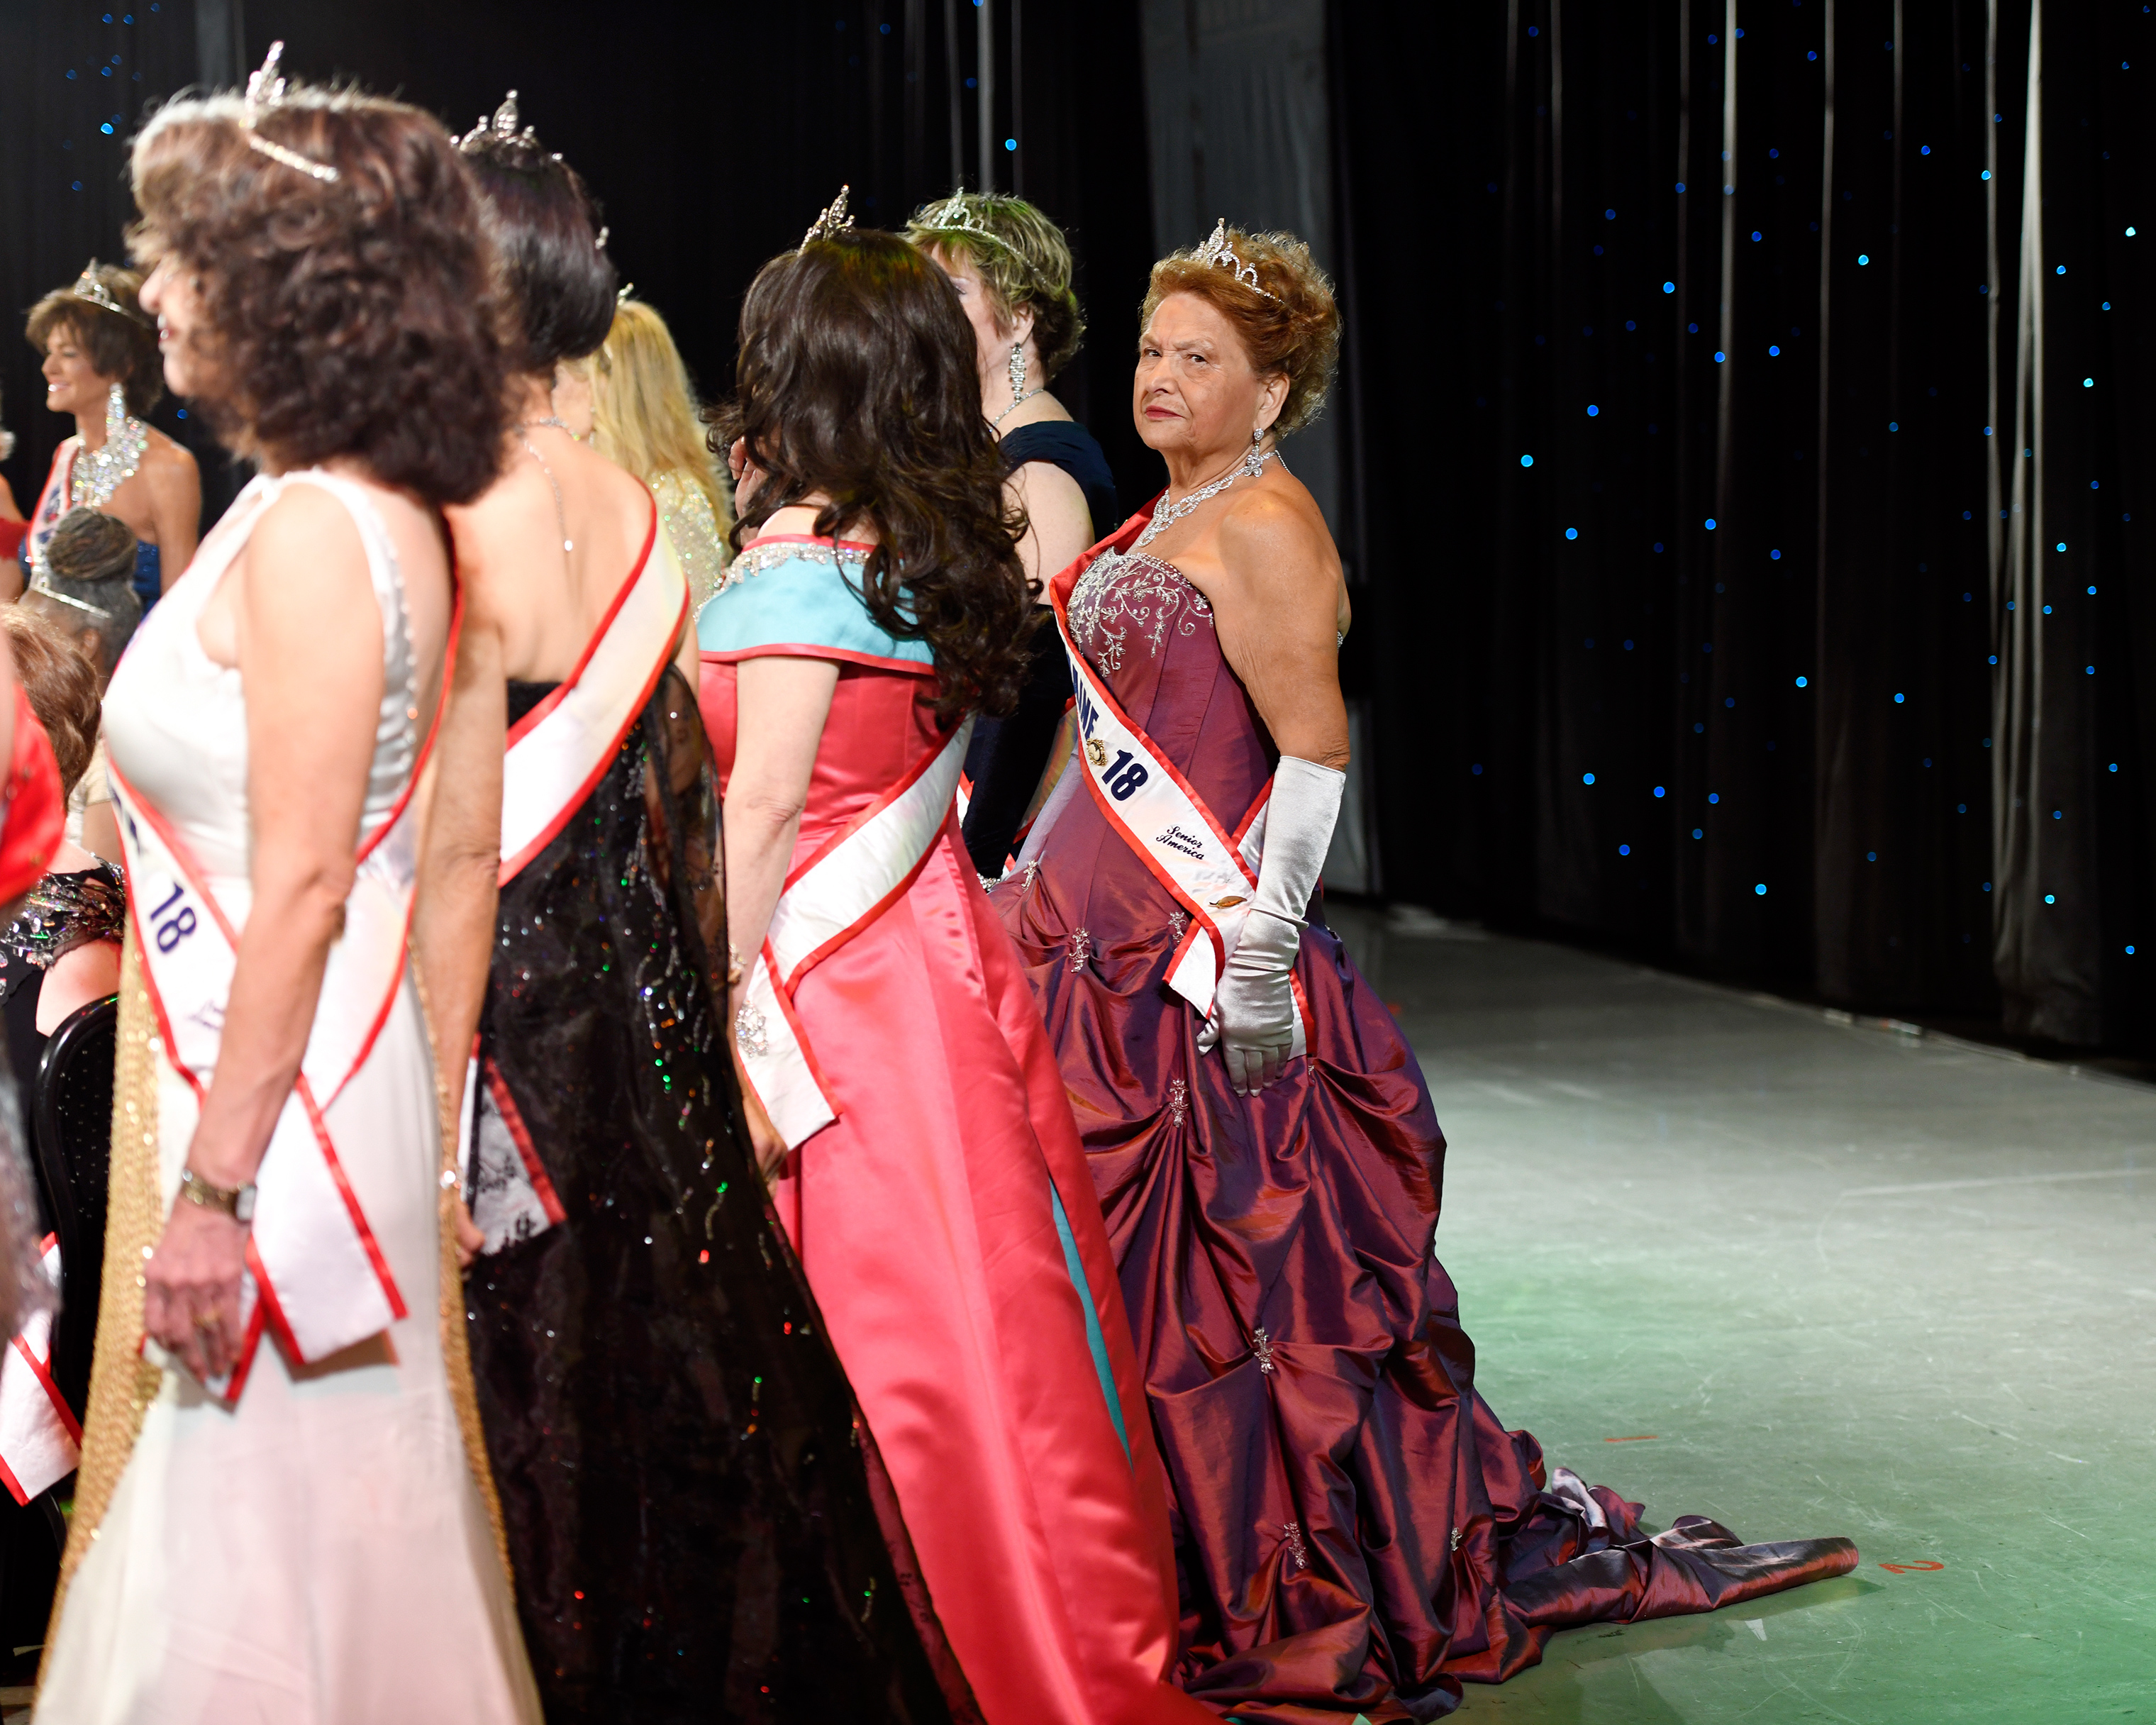 Fortunata Maluccio, Ms. Maine, right, and the rest of the contestants line-up for a group photo. (Rosa Polin for TIME)